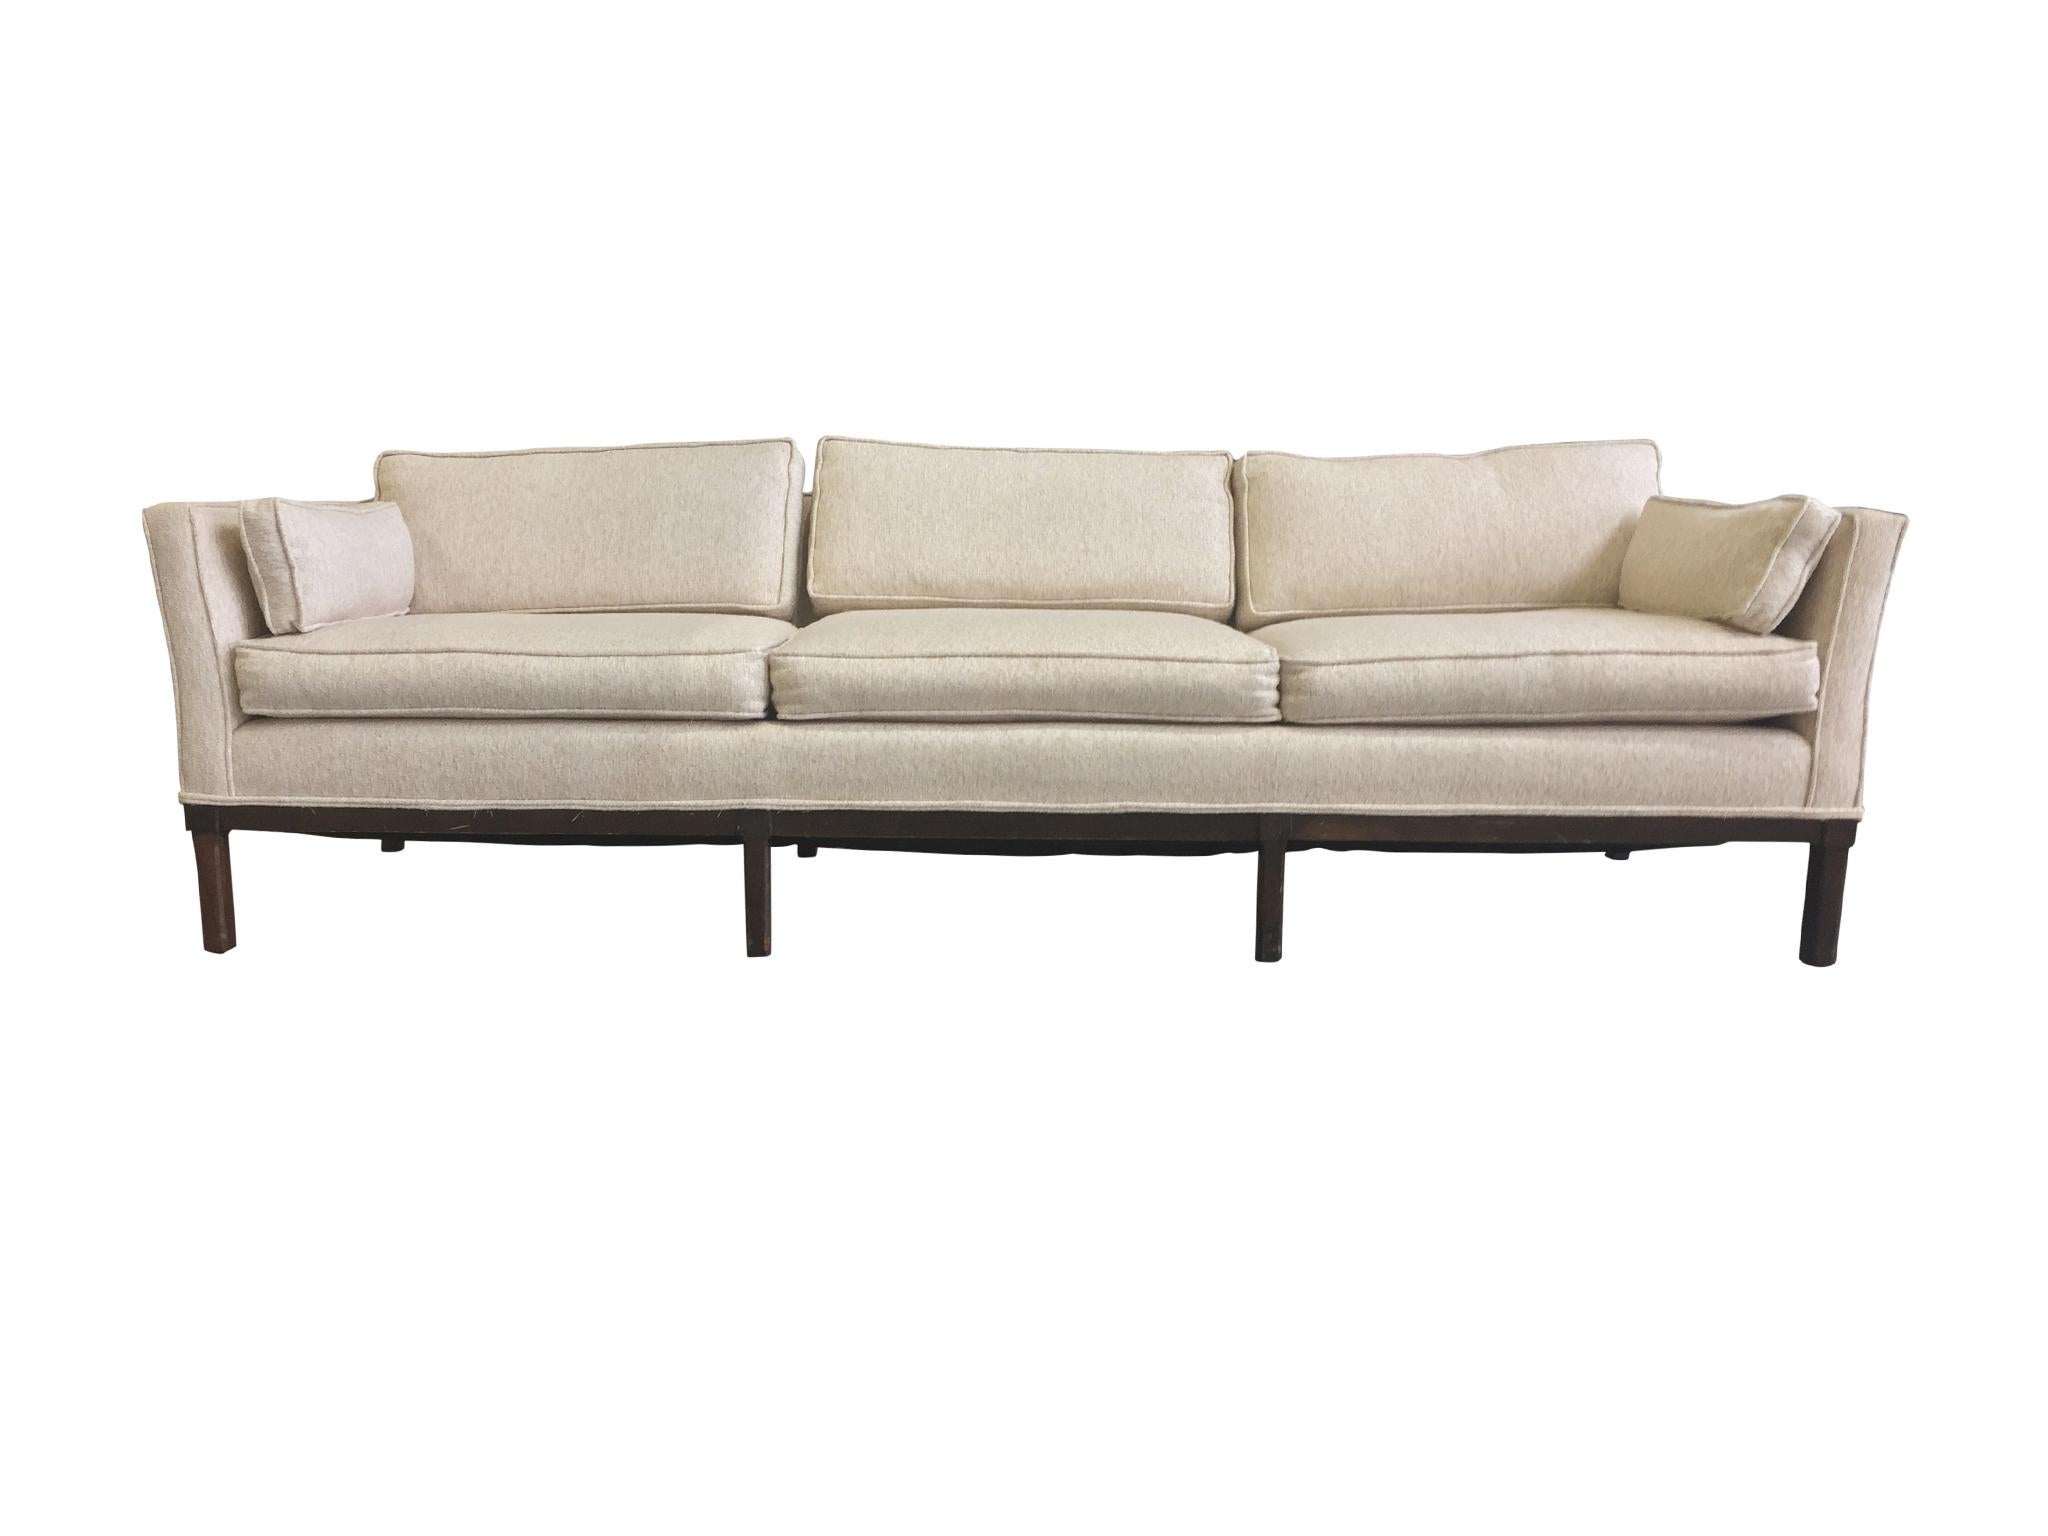 A set comprised of a three-seat sofa and a settee, in the Mid-Century Modern styles of designers such as Edward Wormley. They are upholstered in an off-white, ecru mix of cashmere and wool, and have removable back and seat cushions. The legs and